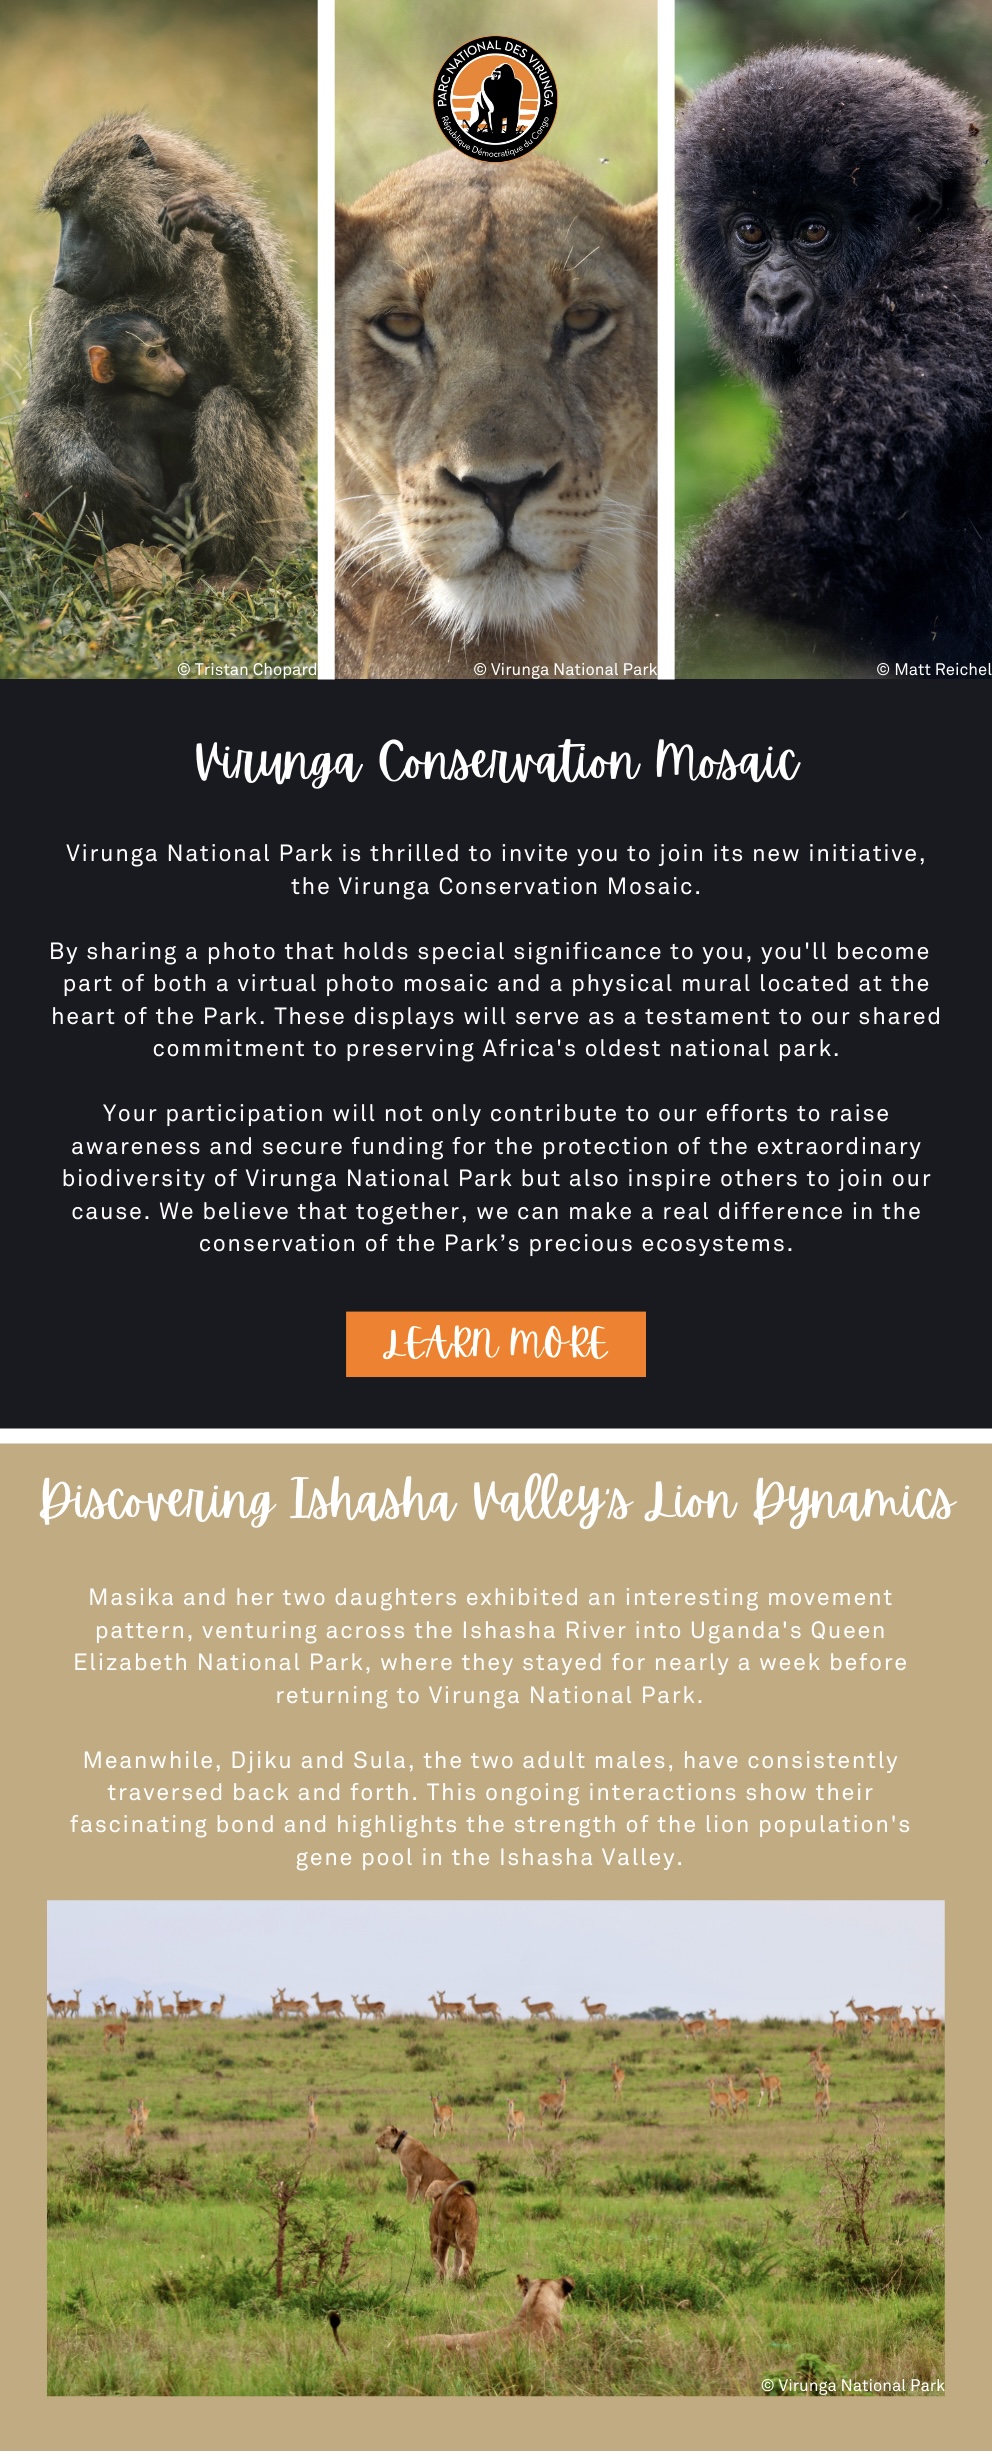 Virunga National Park is thrilled to invite you to join its new initiative, the Virunga Conservation Mosaic.